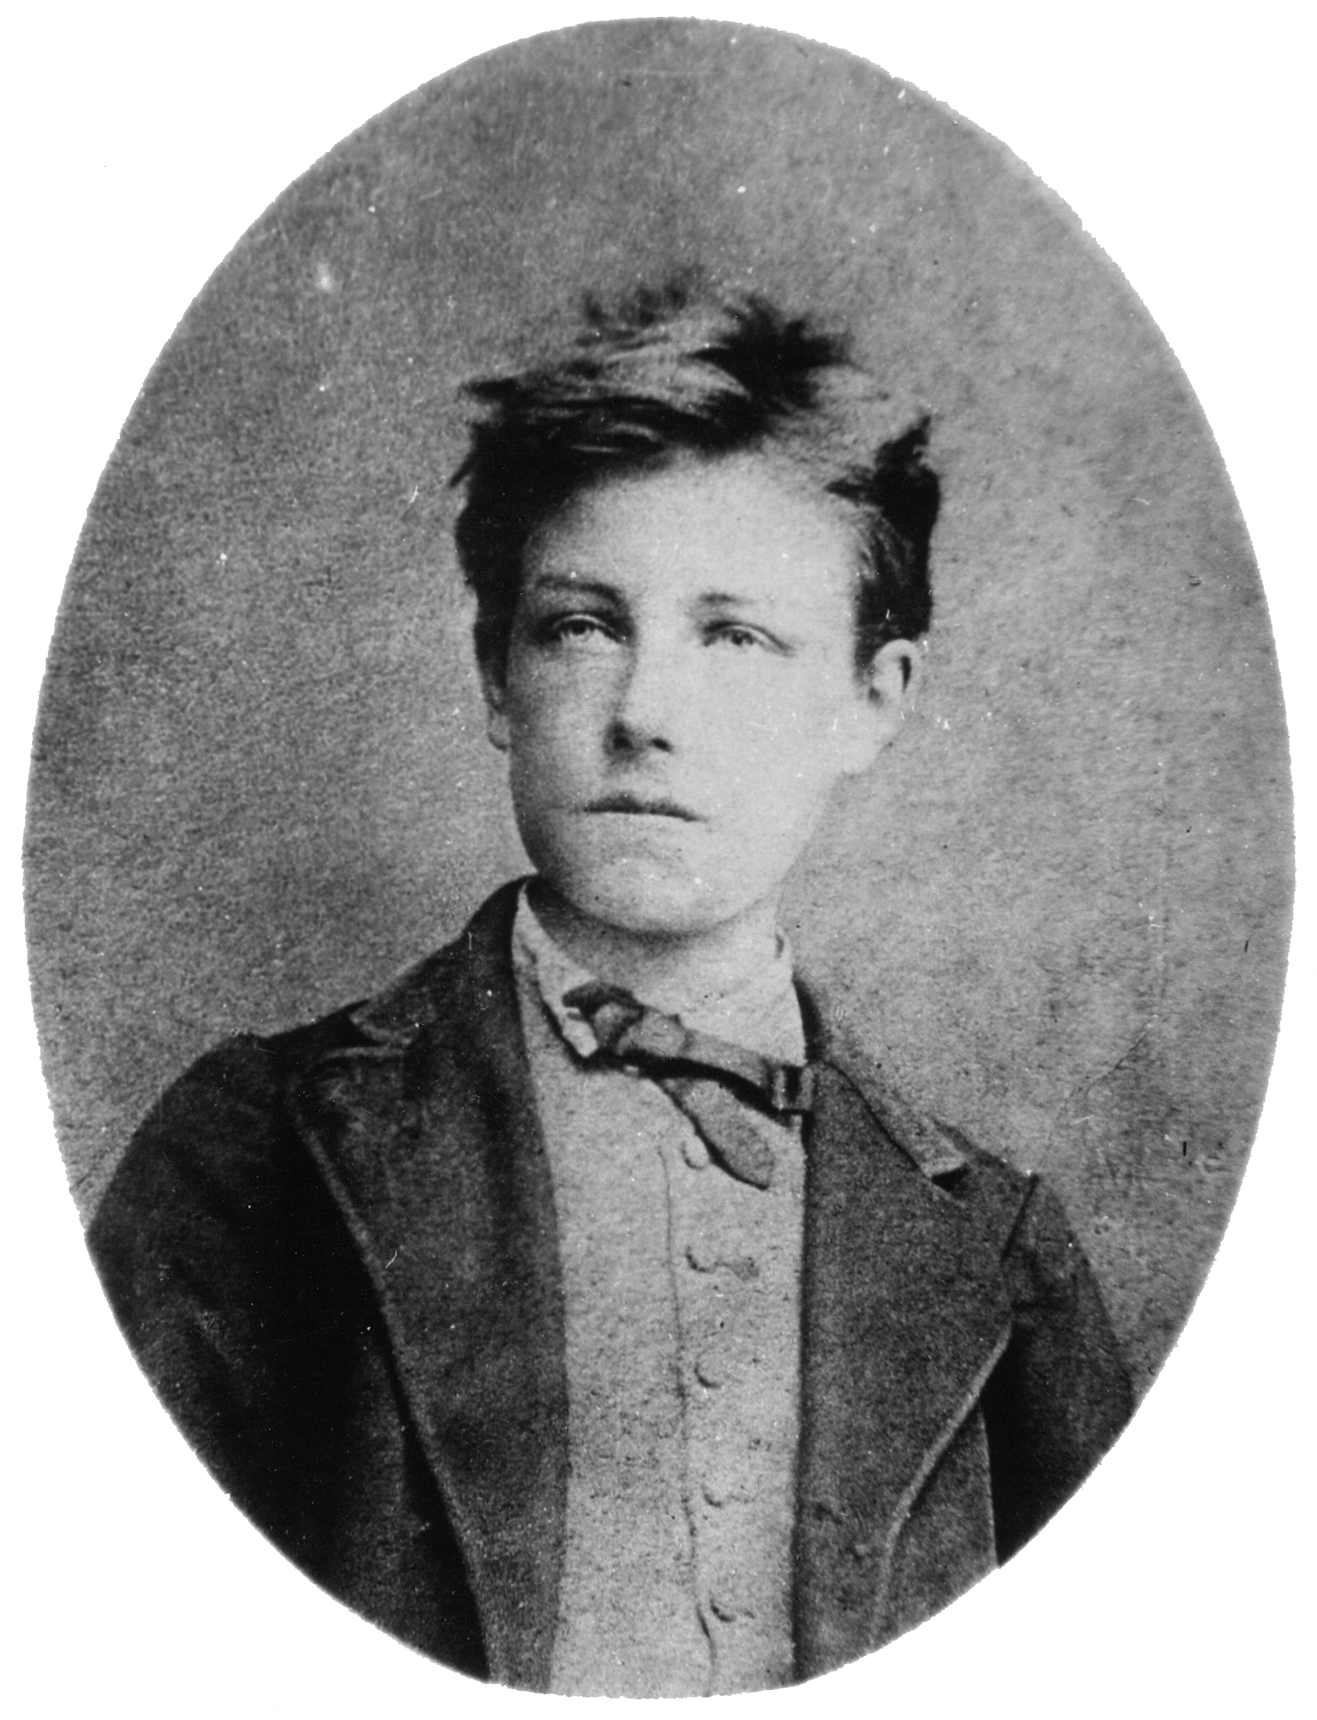 The photographic portrait of Arthur Rimbaud was taken when he was sixteen. The portrait shows the head and torso of a young man with tousled hair, wearing a tie, vest, and jacket. His face is slightly angled and he is looking to the left; his face is serious and his lips are closed.